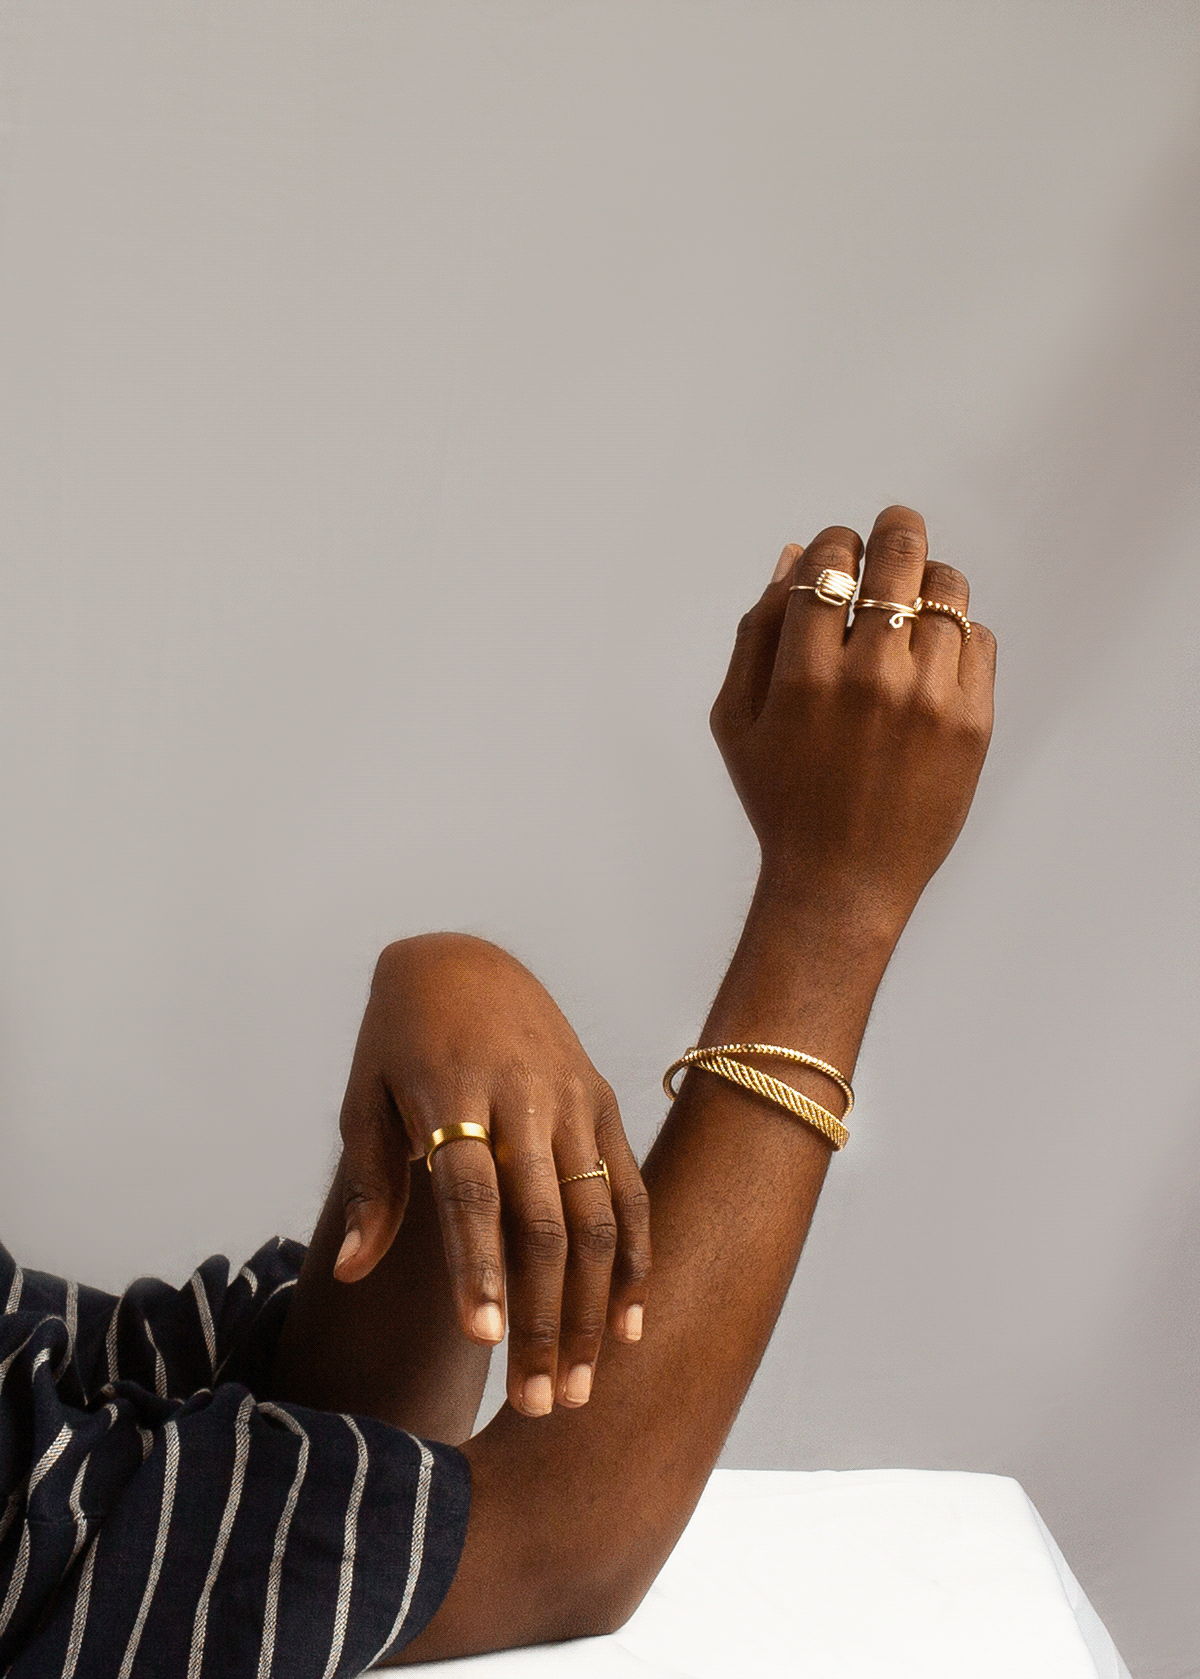 african woman black stories black woman Fashion  jewelry Personal Stories Personal Work Photography  self portrait self portrait photography